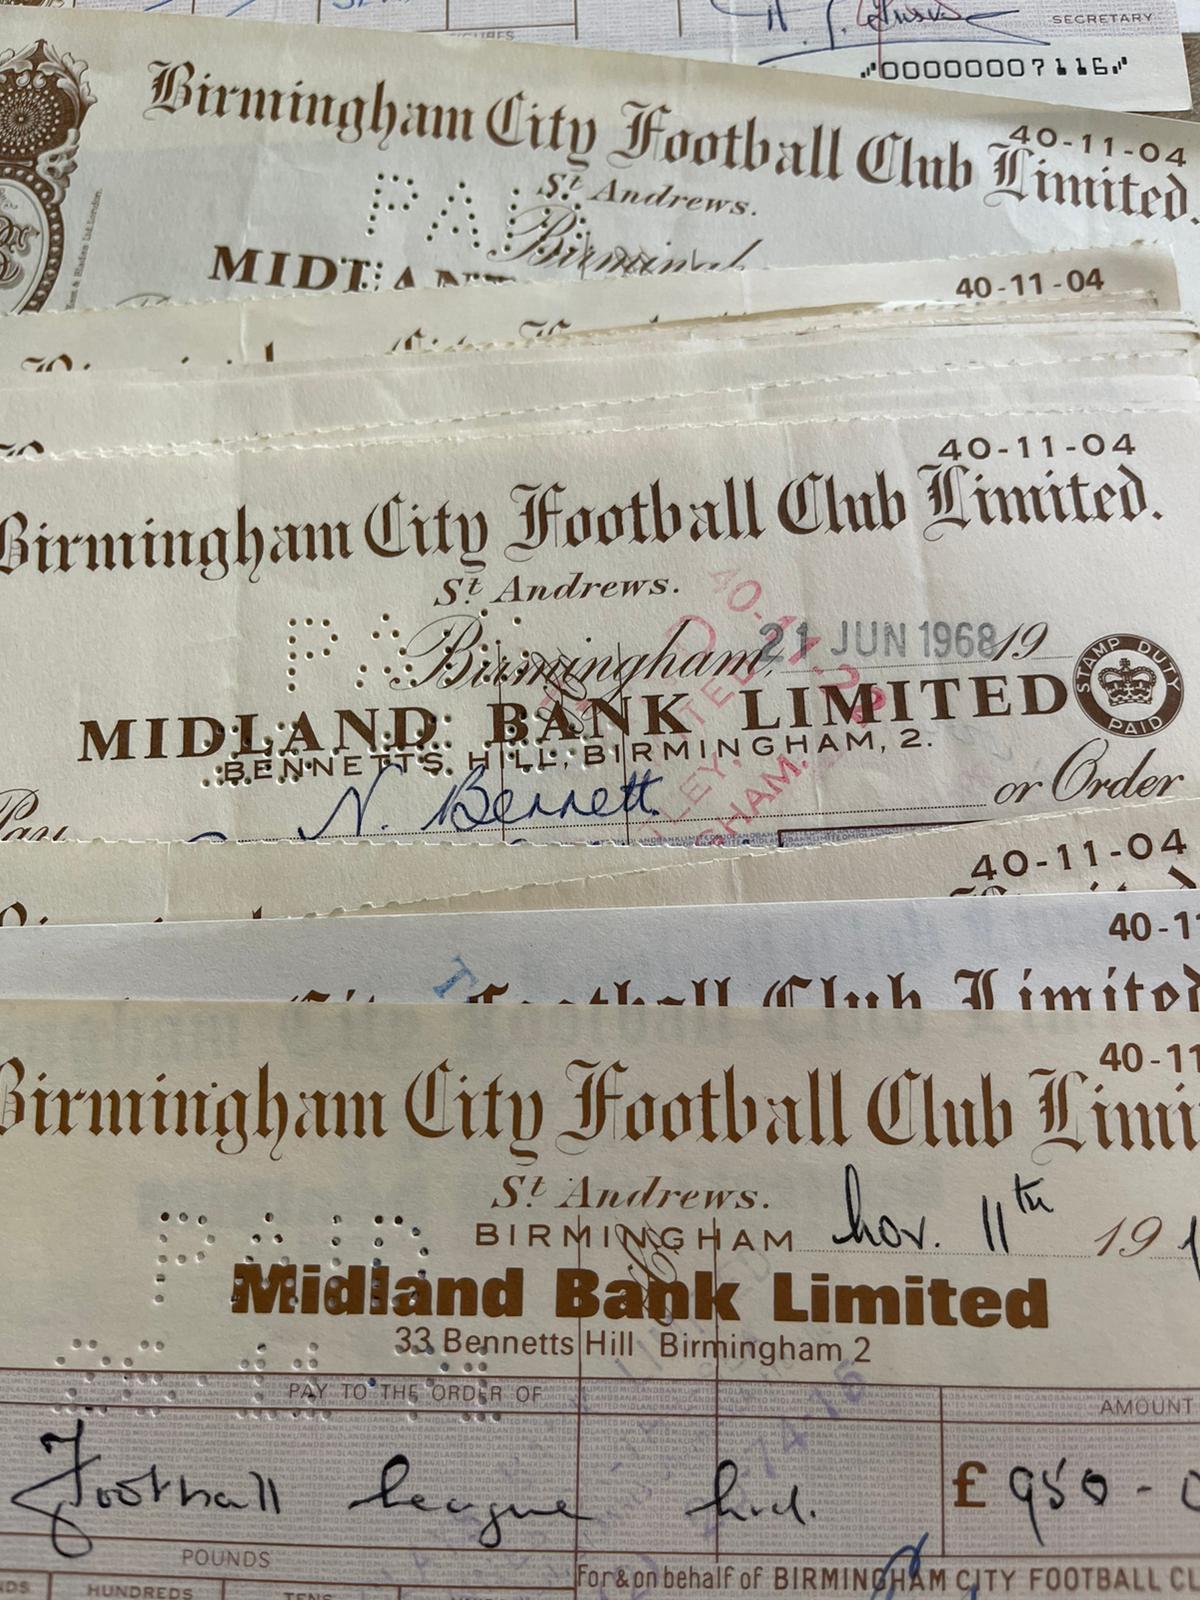 * NEW * Original Birmingham City / Midland Bank Cheques Starting from £3.99 inc. delivery